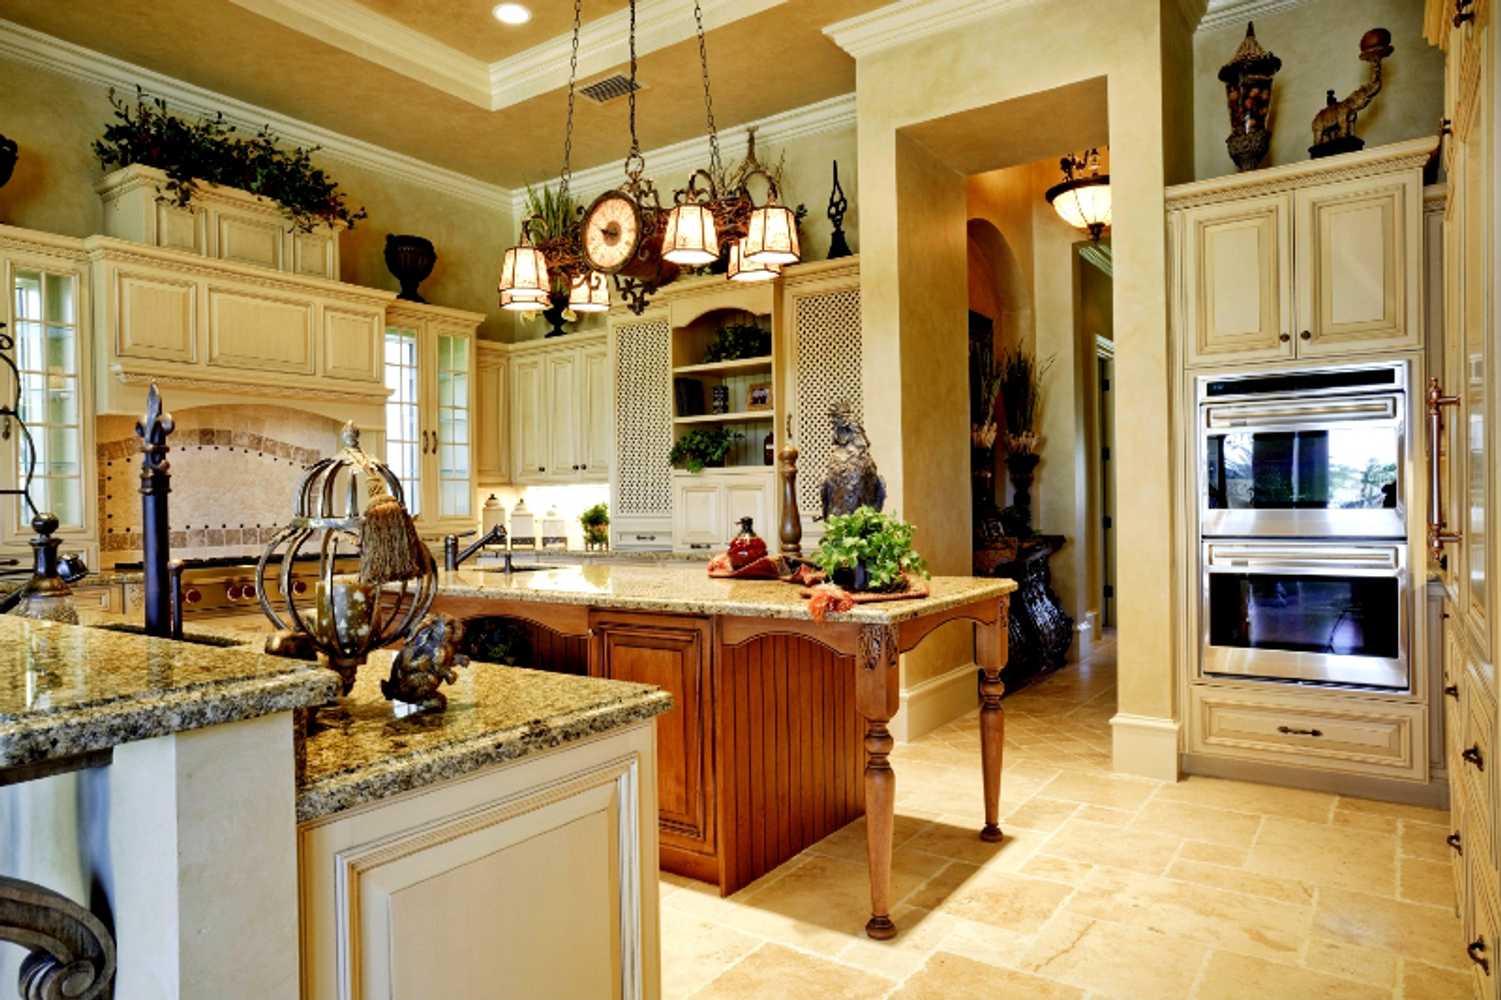 These kitchens look great after getting cabinet refacing by Cabinet Cures of Oklahoma!